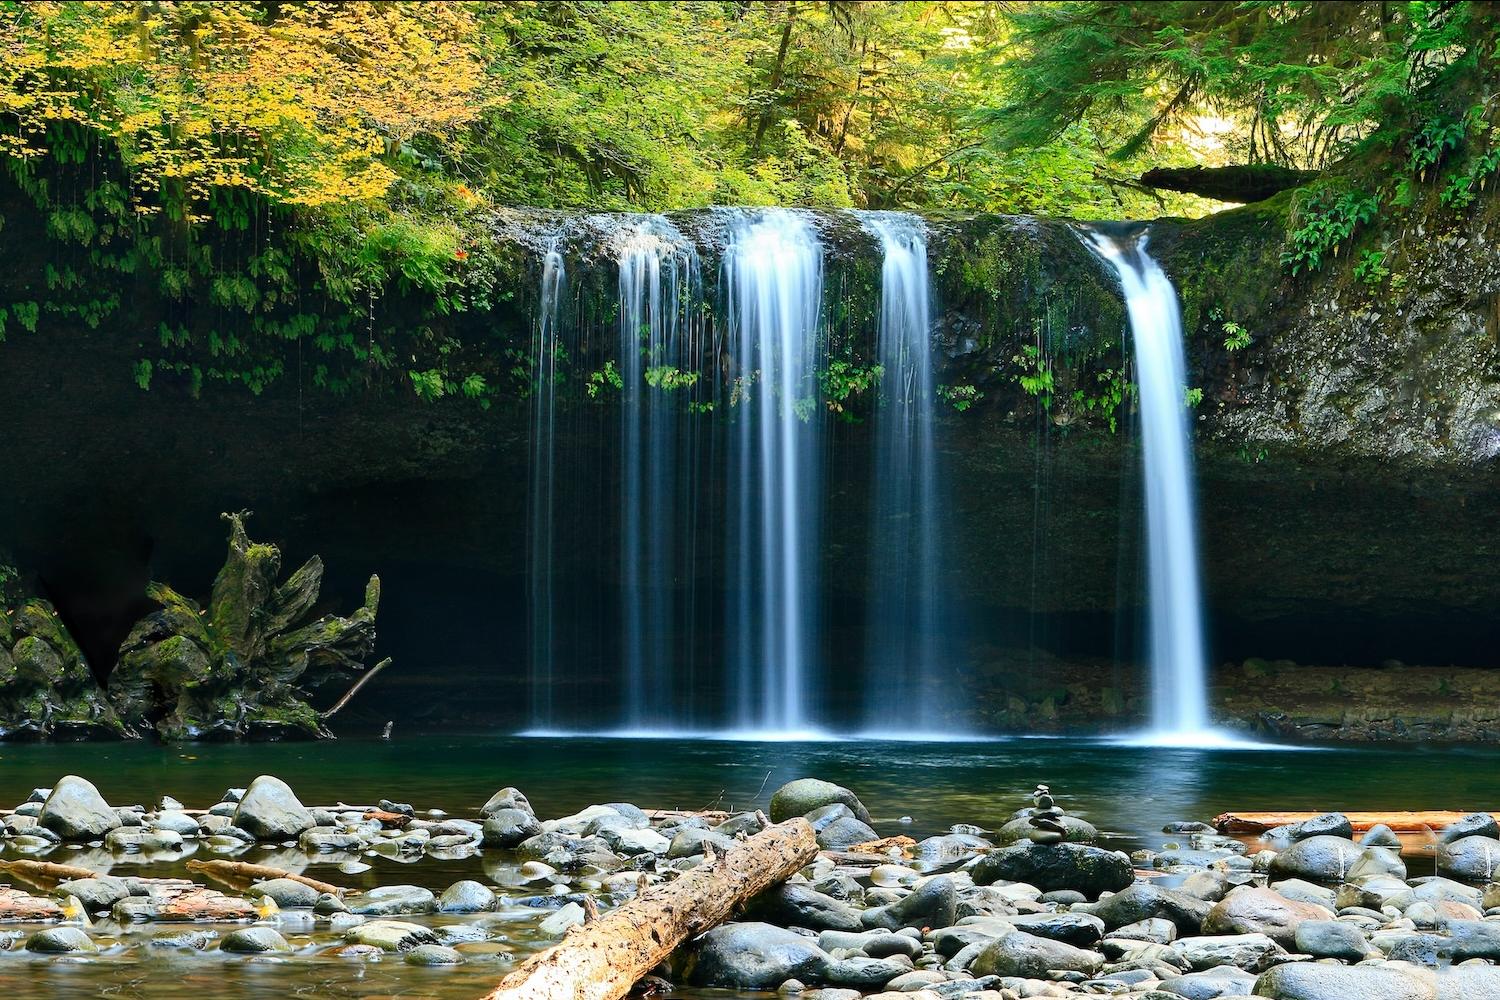 Nature scene - waterfall in the forest - quantifying the value of nature 